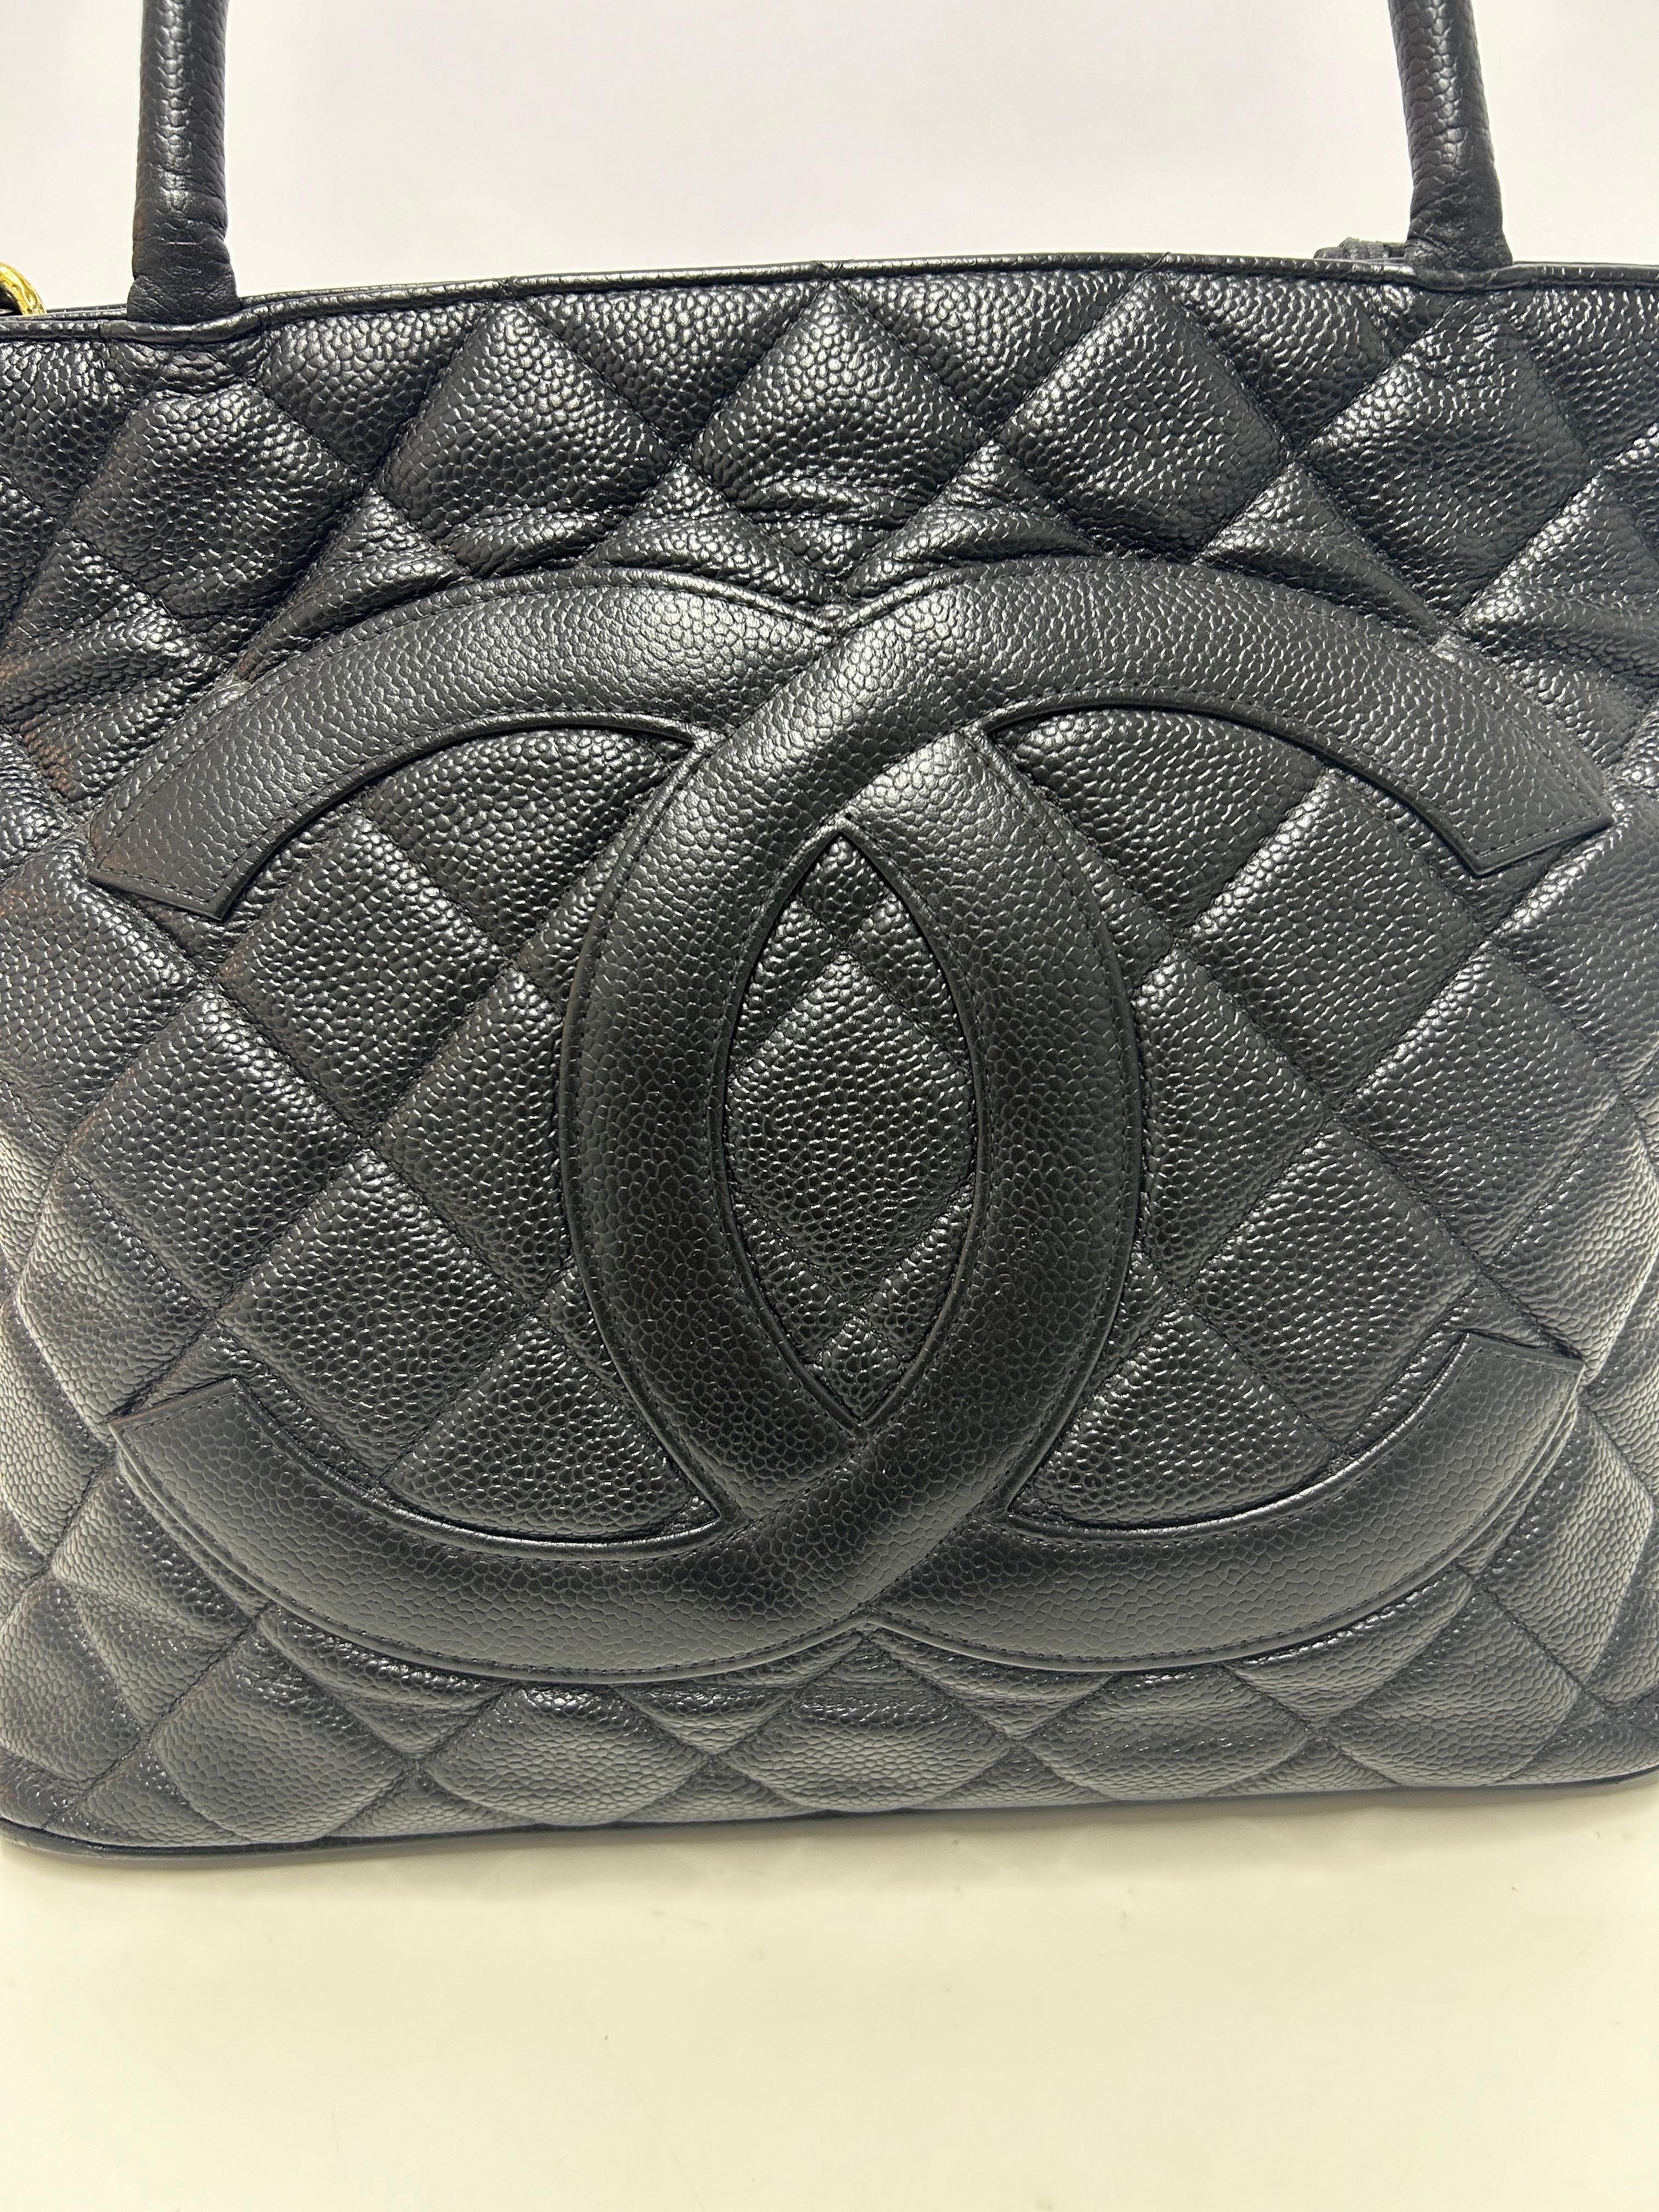 Chanel Quilted Caviar Leather 2002/2003 Medallion Tote For Sale 12